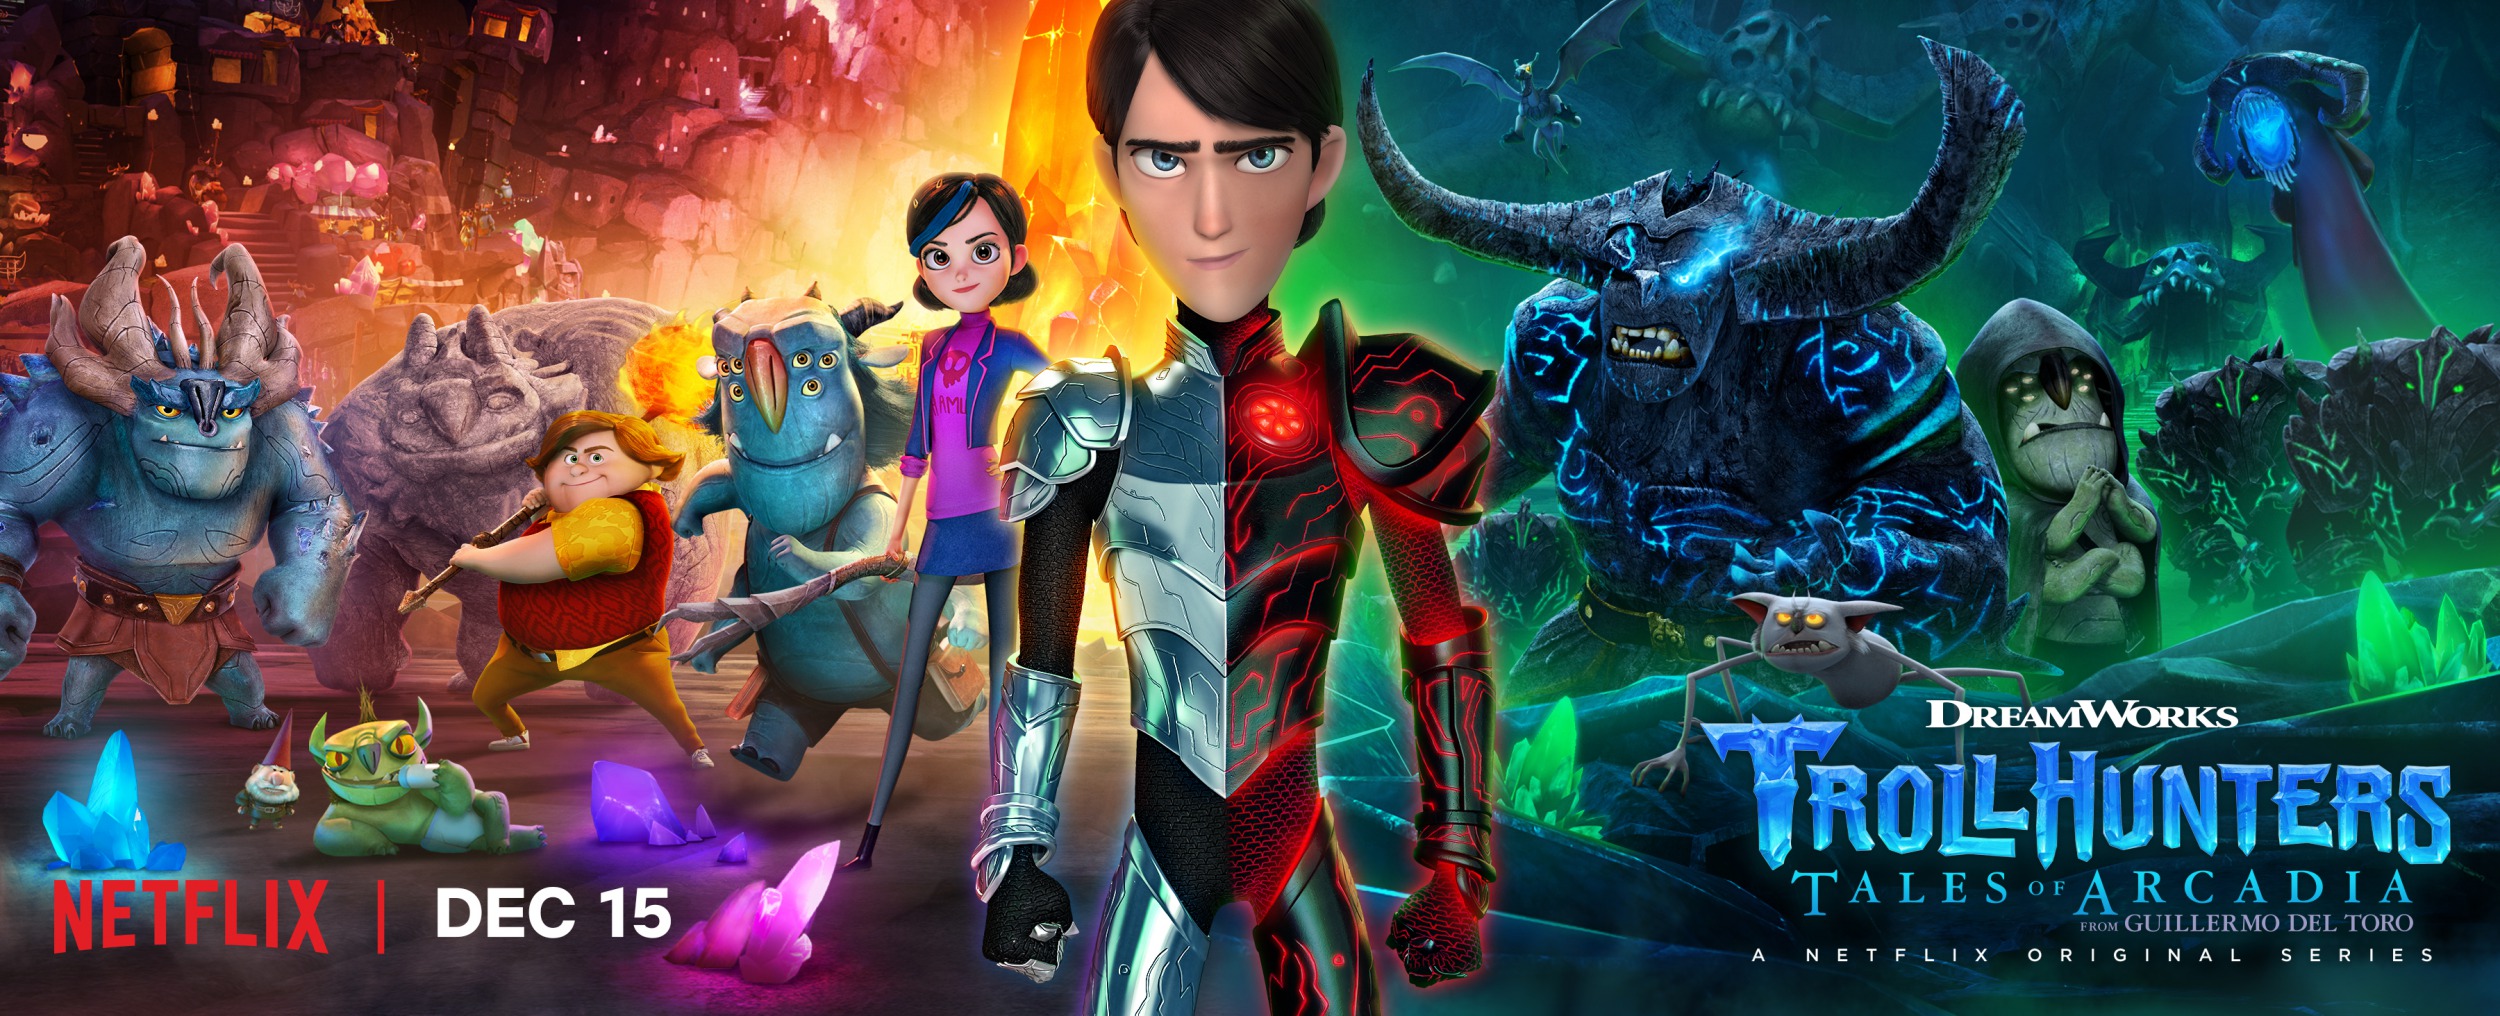 Mega Sized TV Poster Image for Trollhunters (#16 of 20)